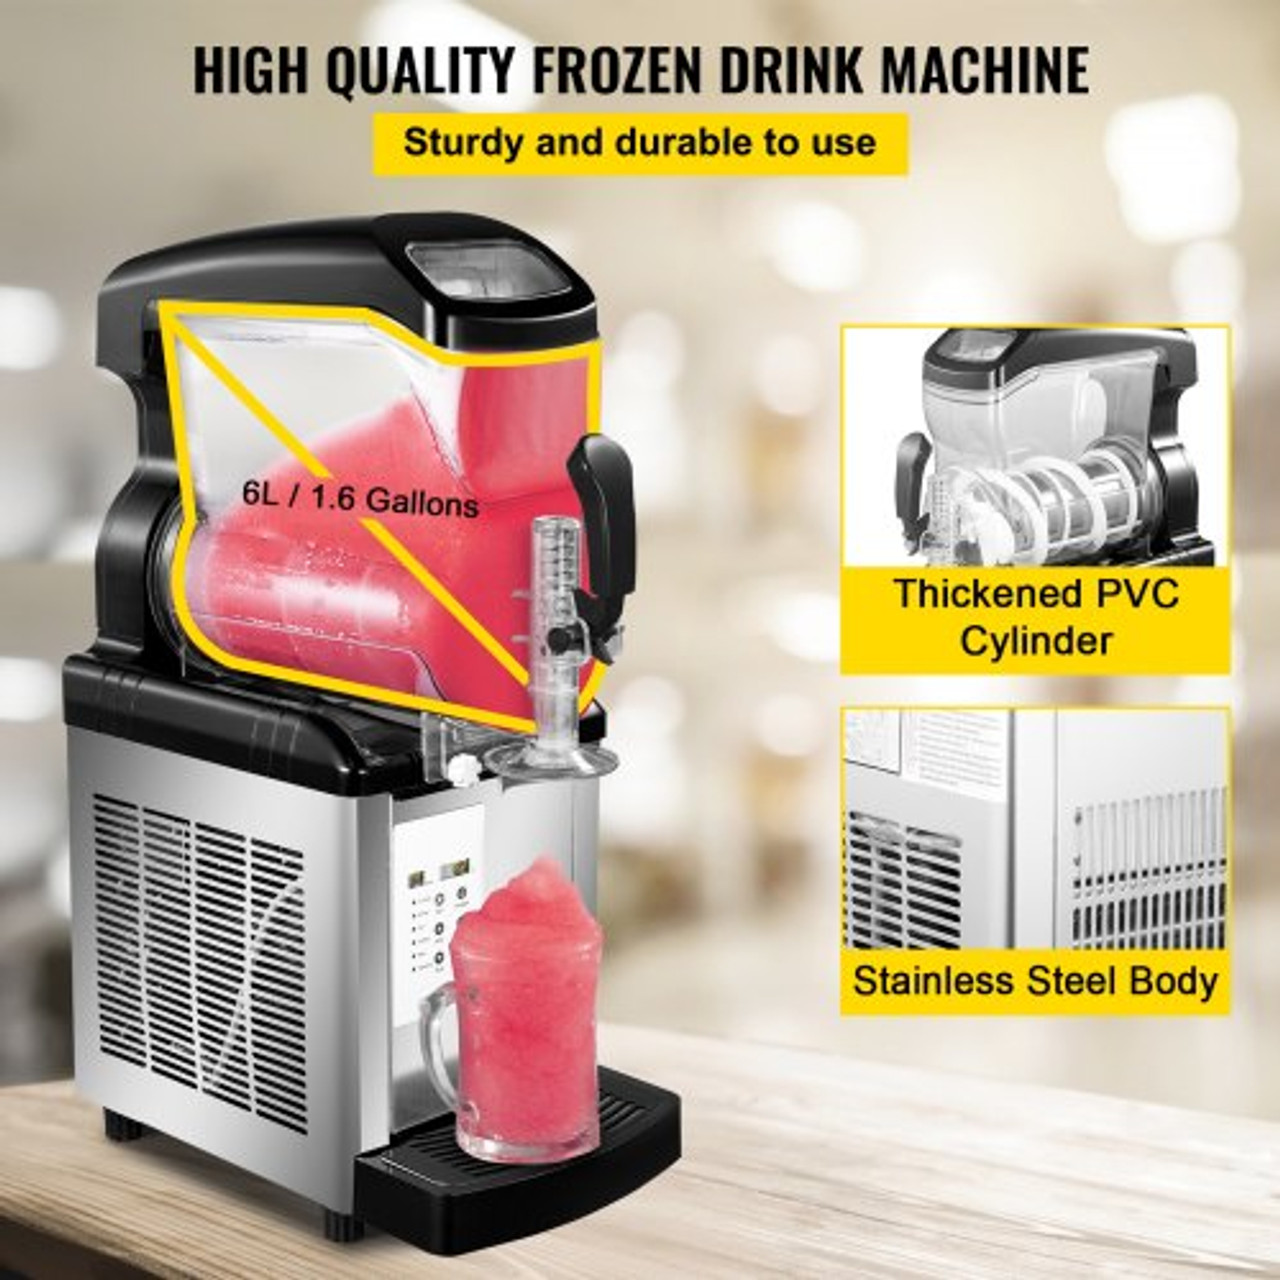 Slushie Machine 2 in 1 Commercial Slushy Machine 6L Temperature -10? to 5? Soft Ice Cream Maker 450W LED Display Automatic Clean Preservation Function for Supermarkets Cafes Restaurants Bars